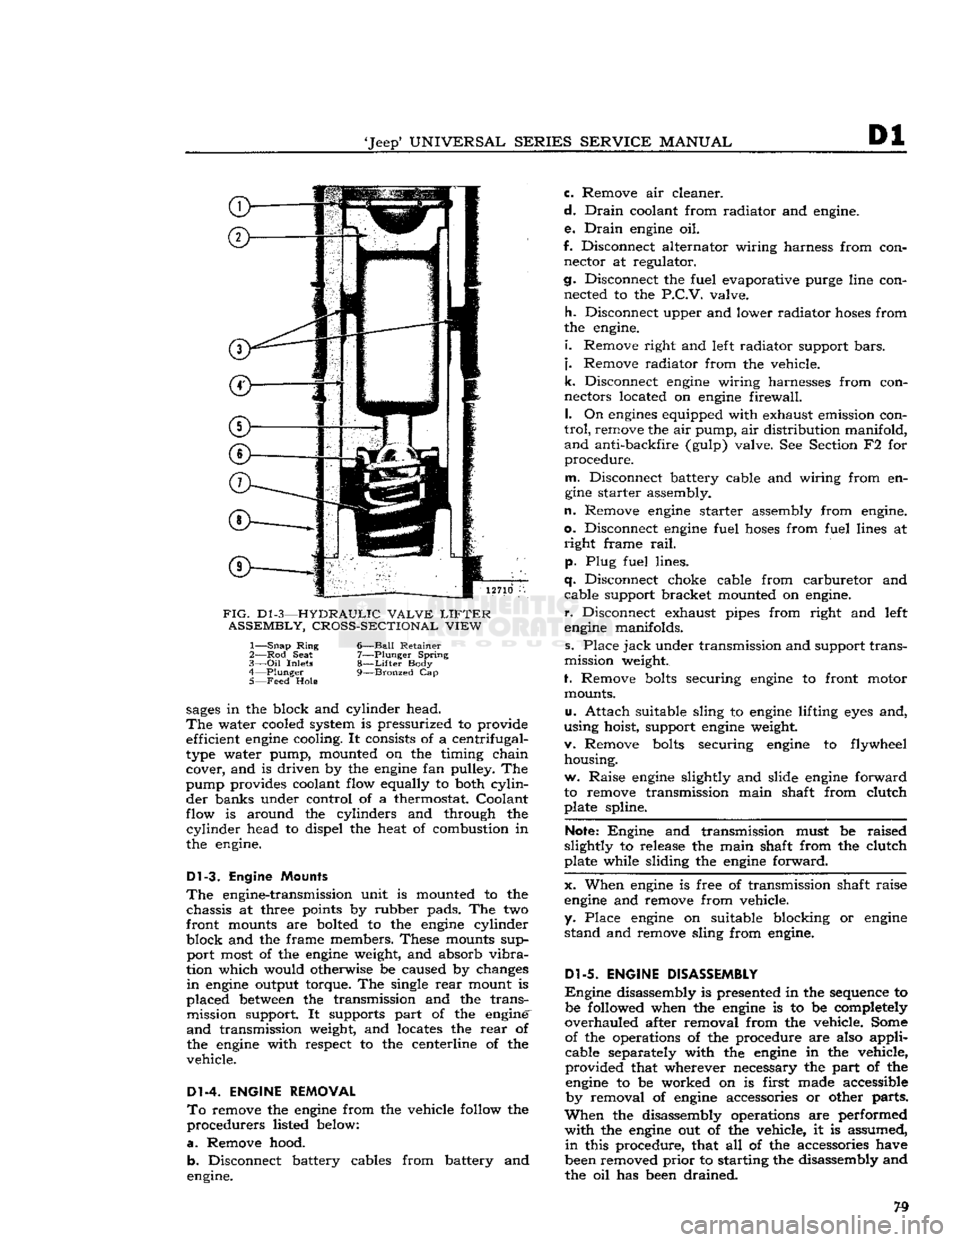 JEEP CJ 1953  Service Manual 
Jeep*
 UNIVERSAL SERIES SERVICE
 MANUAL 

Dl 

12710 

FIG.
 D1
 -3—HYDRAULIC VALVE
 LIFTER 
 ASSEMBLY, CROSS-SECTIONAL VIEW 
1—
 Snap
 Ring
 6—Ball Retainer 

2— Rod
 Seat
 7—Plunger Spri